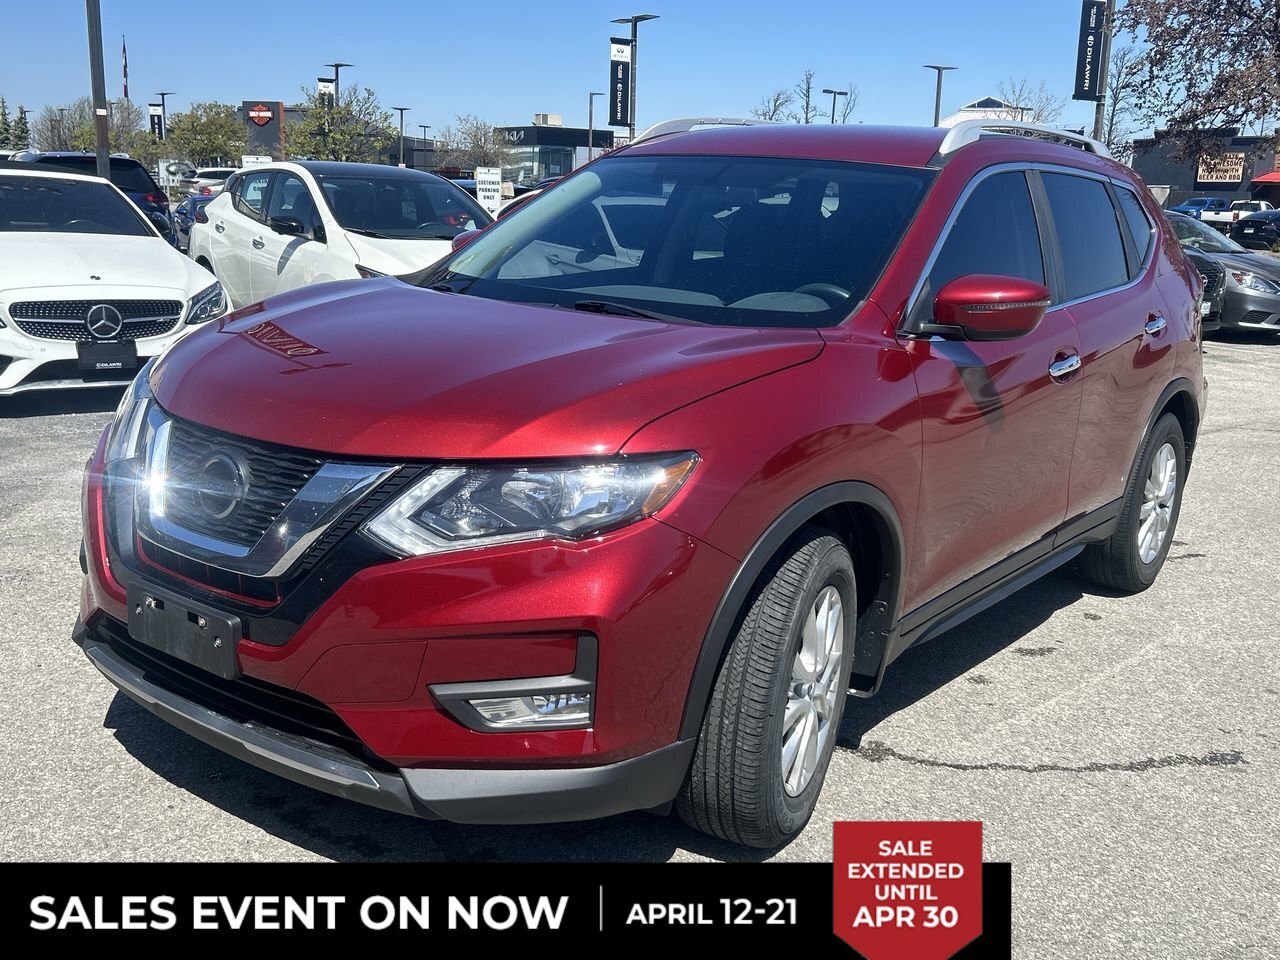 2018 Nissan Rogue SV FWD Keyless Entry | Backup Cam / 